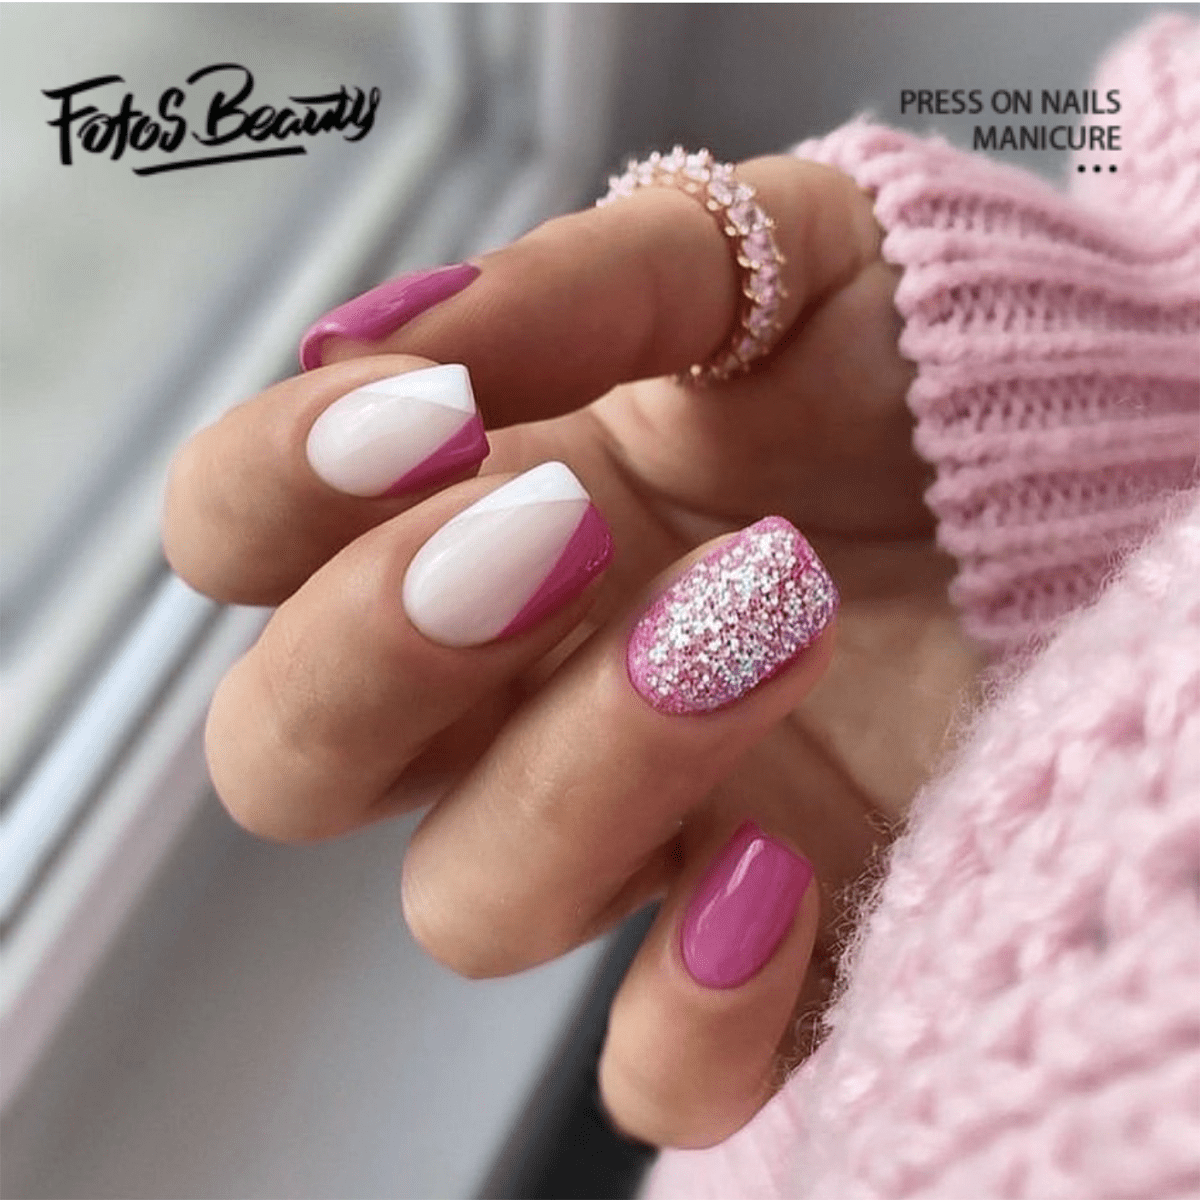 Fofosbeauty 24pcs Press on False Nails, Long Coffin Fake Nails for Girls  Women, Coffin Gel White with Stones 